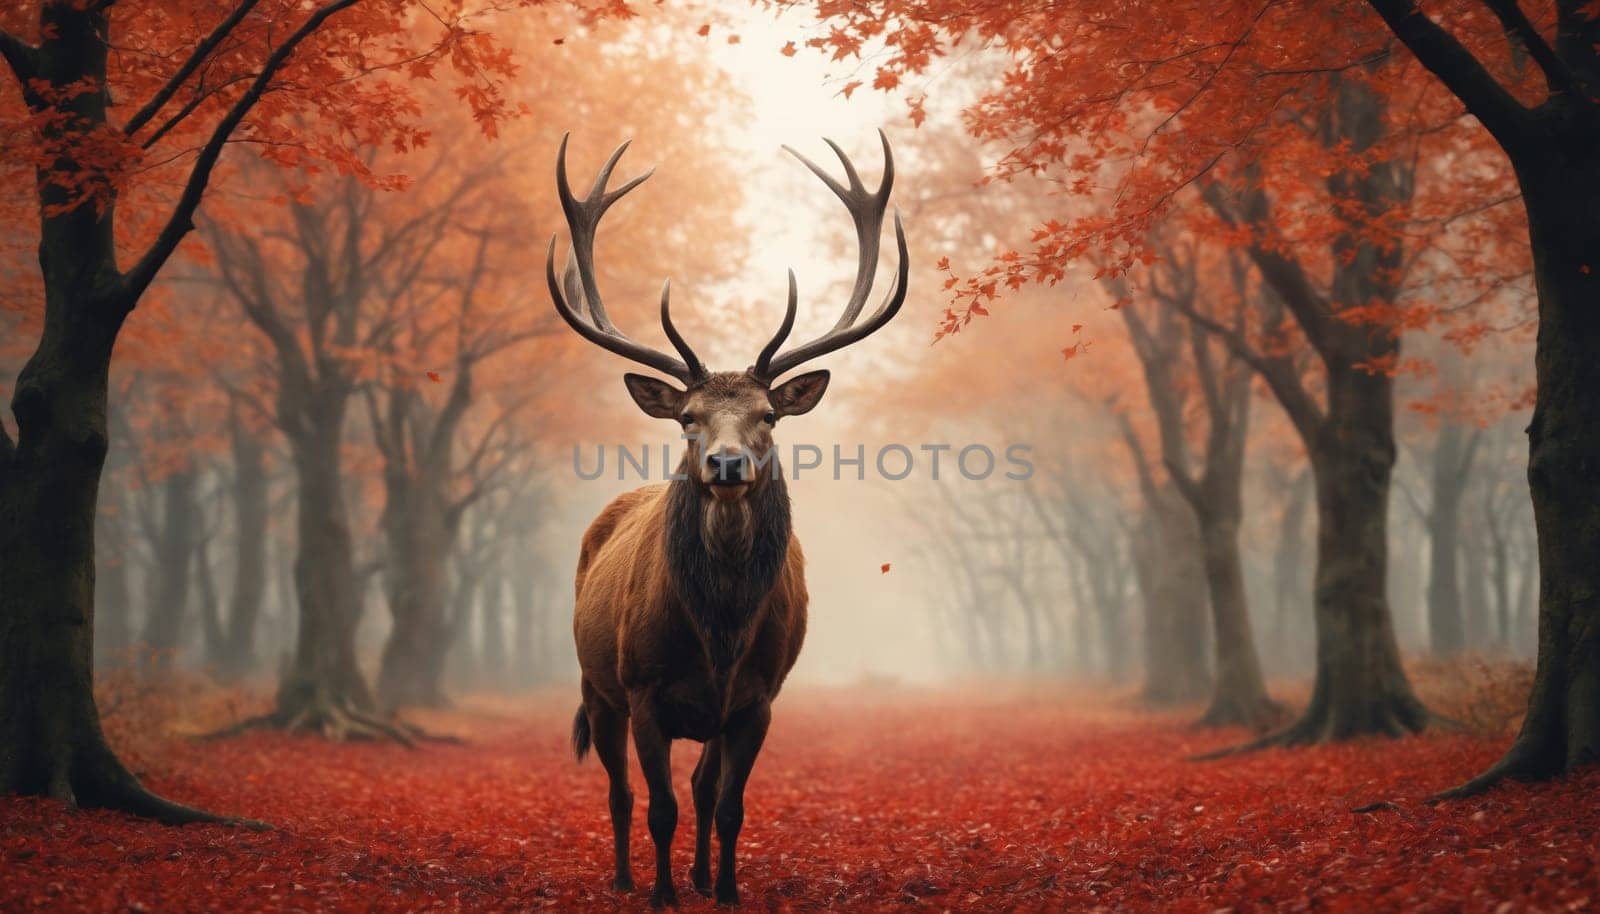 A solitary stag with impressive antlers stands amidst a forest cloaked in the colors of autumn. The air is thick with mist, creating a sense of mystery and tranquility. The red and orange leaves on the trees add to the vibrant scene.